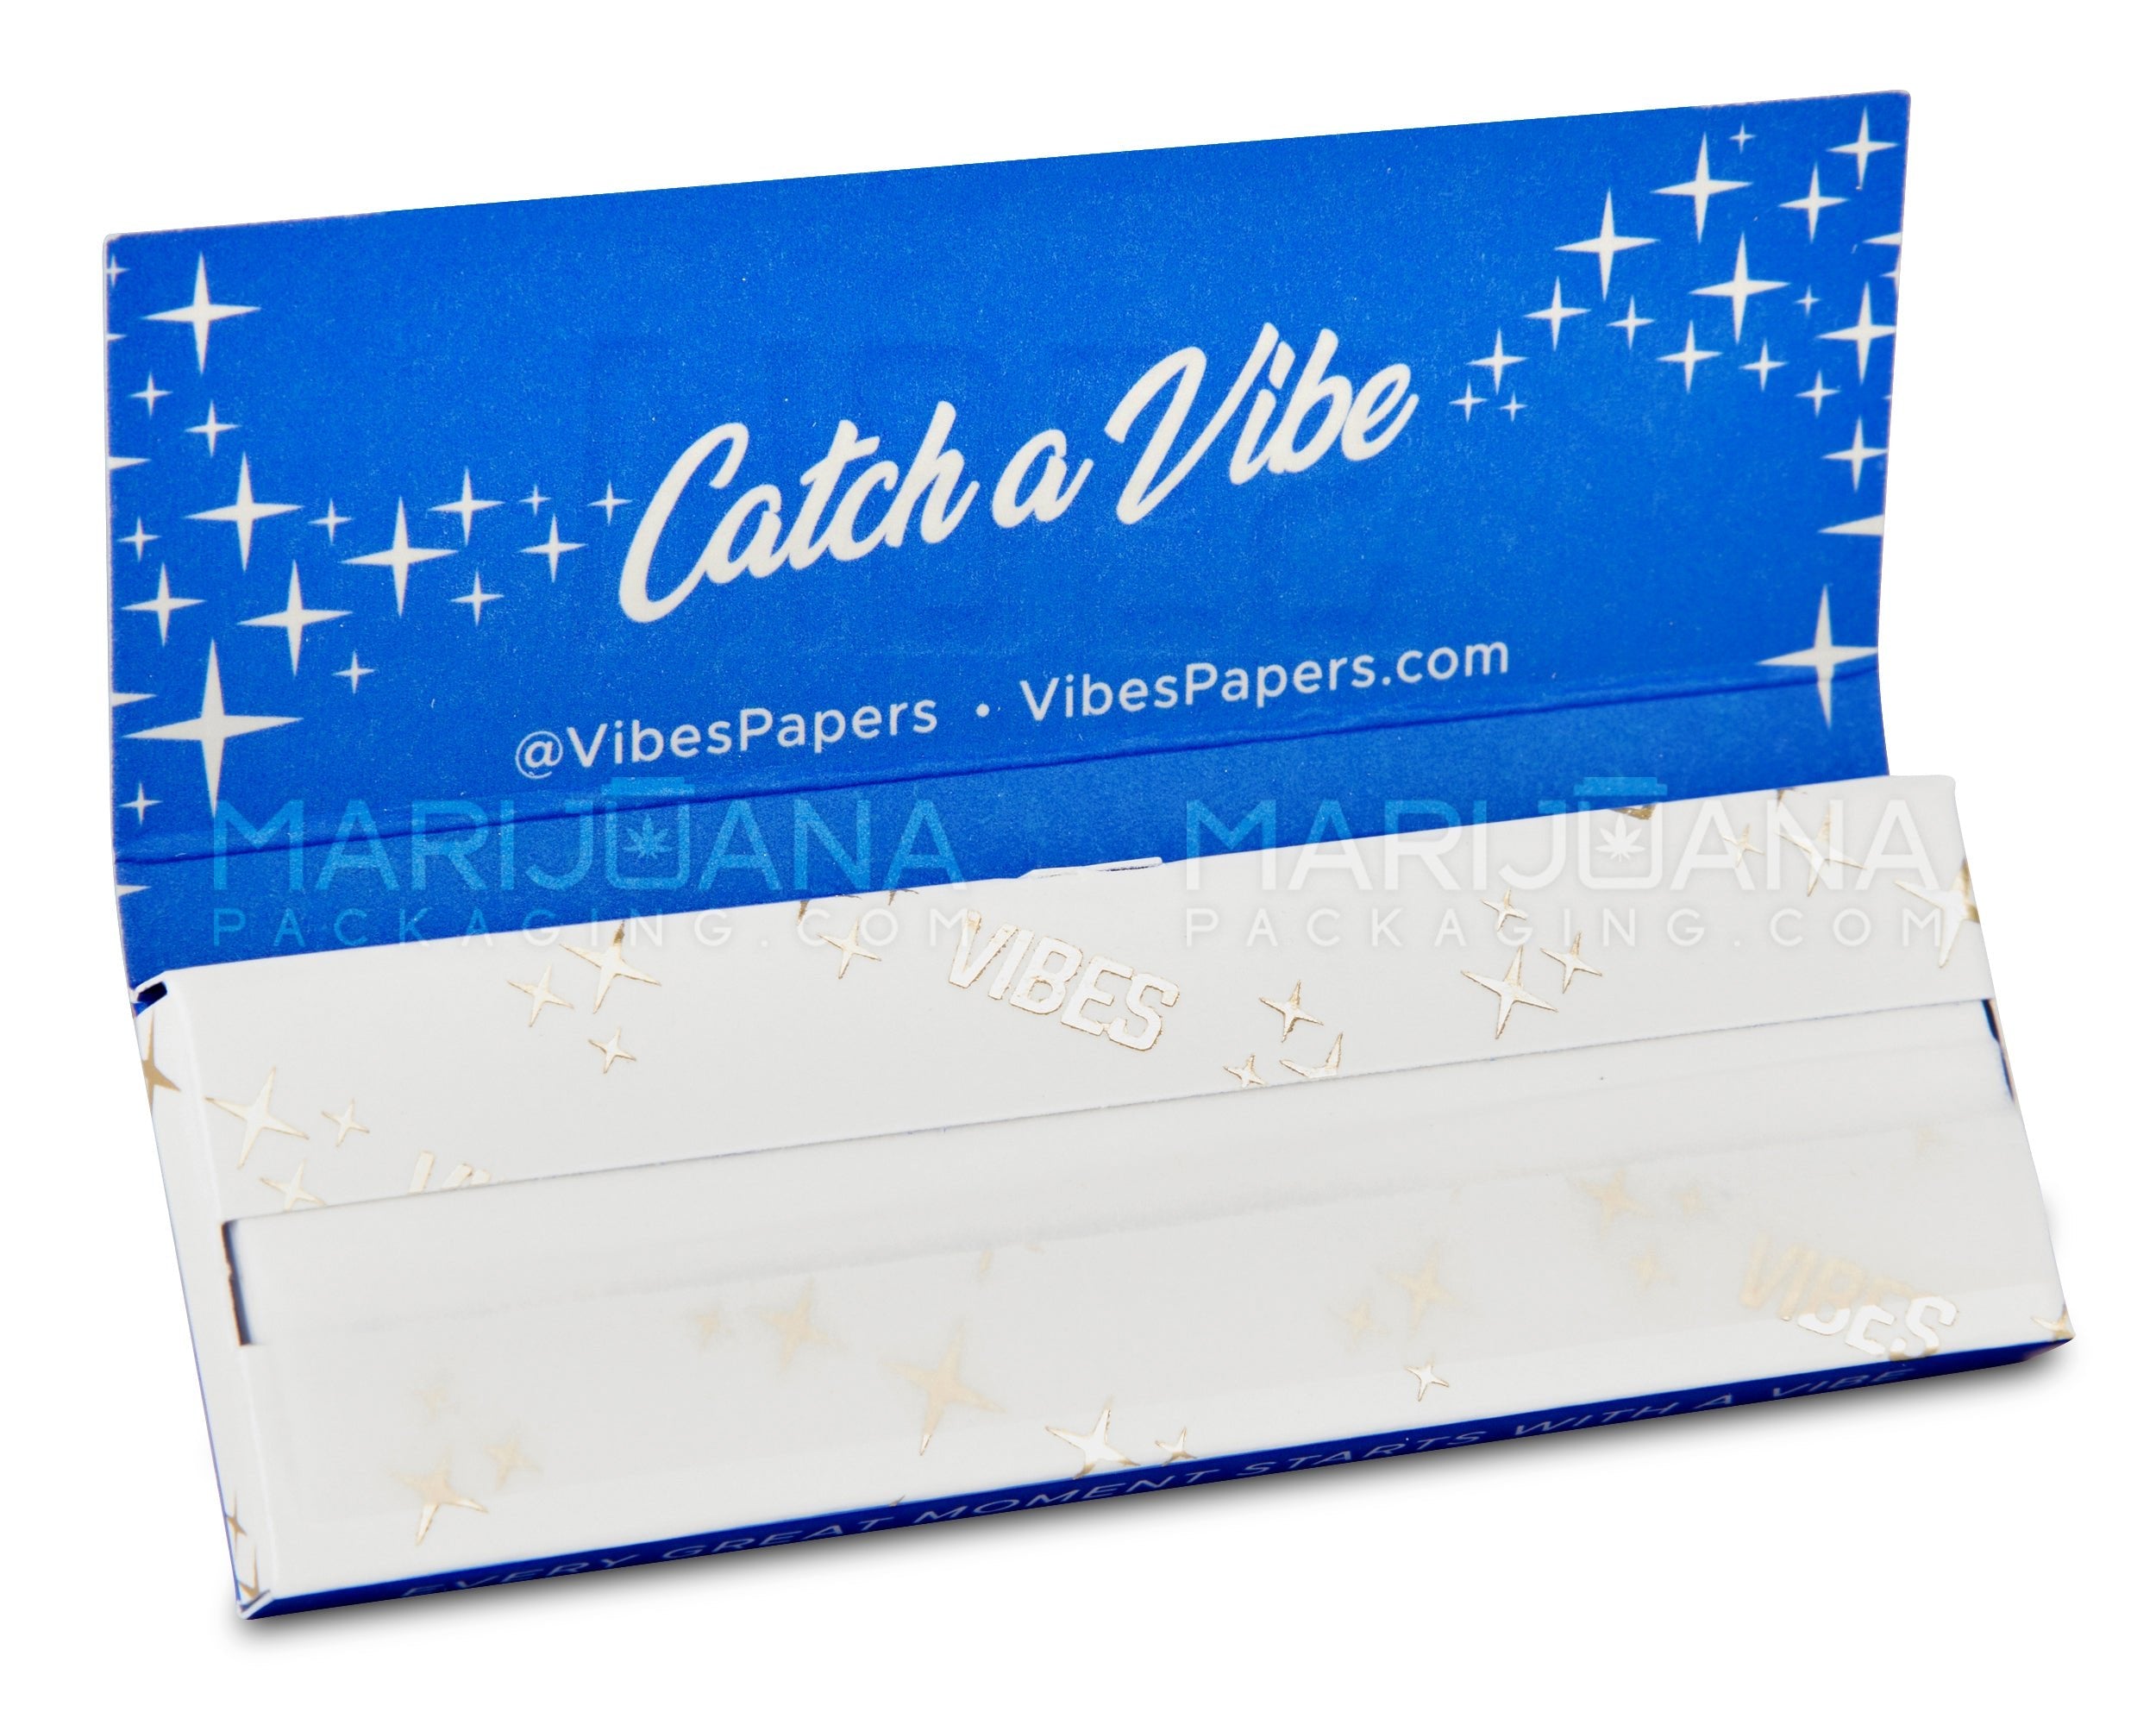 VIBES | 'Retail Display' 1 1/4 Size Size Rolling Papers | 84mm - White Paper - 50 Count - 3